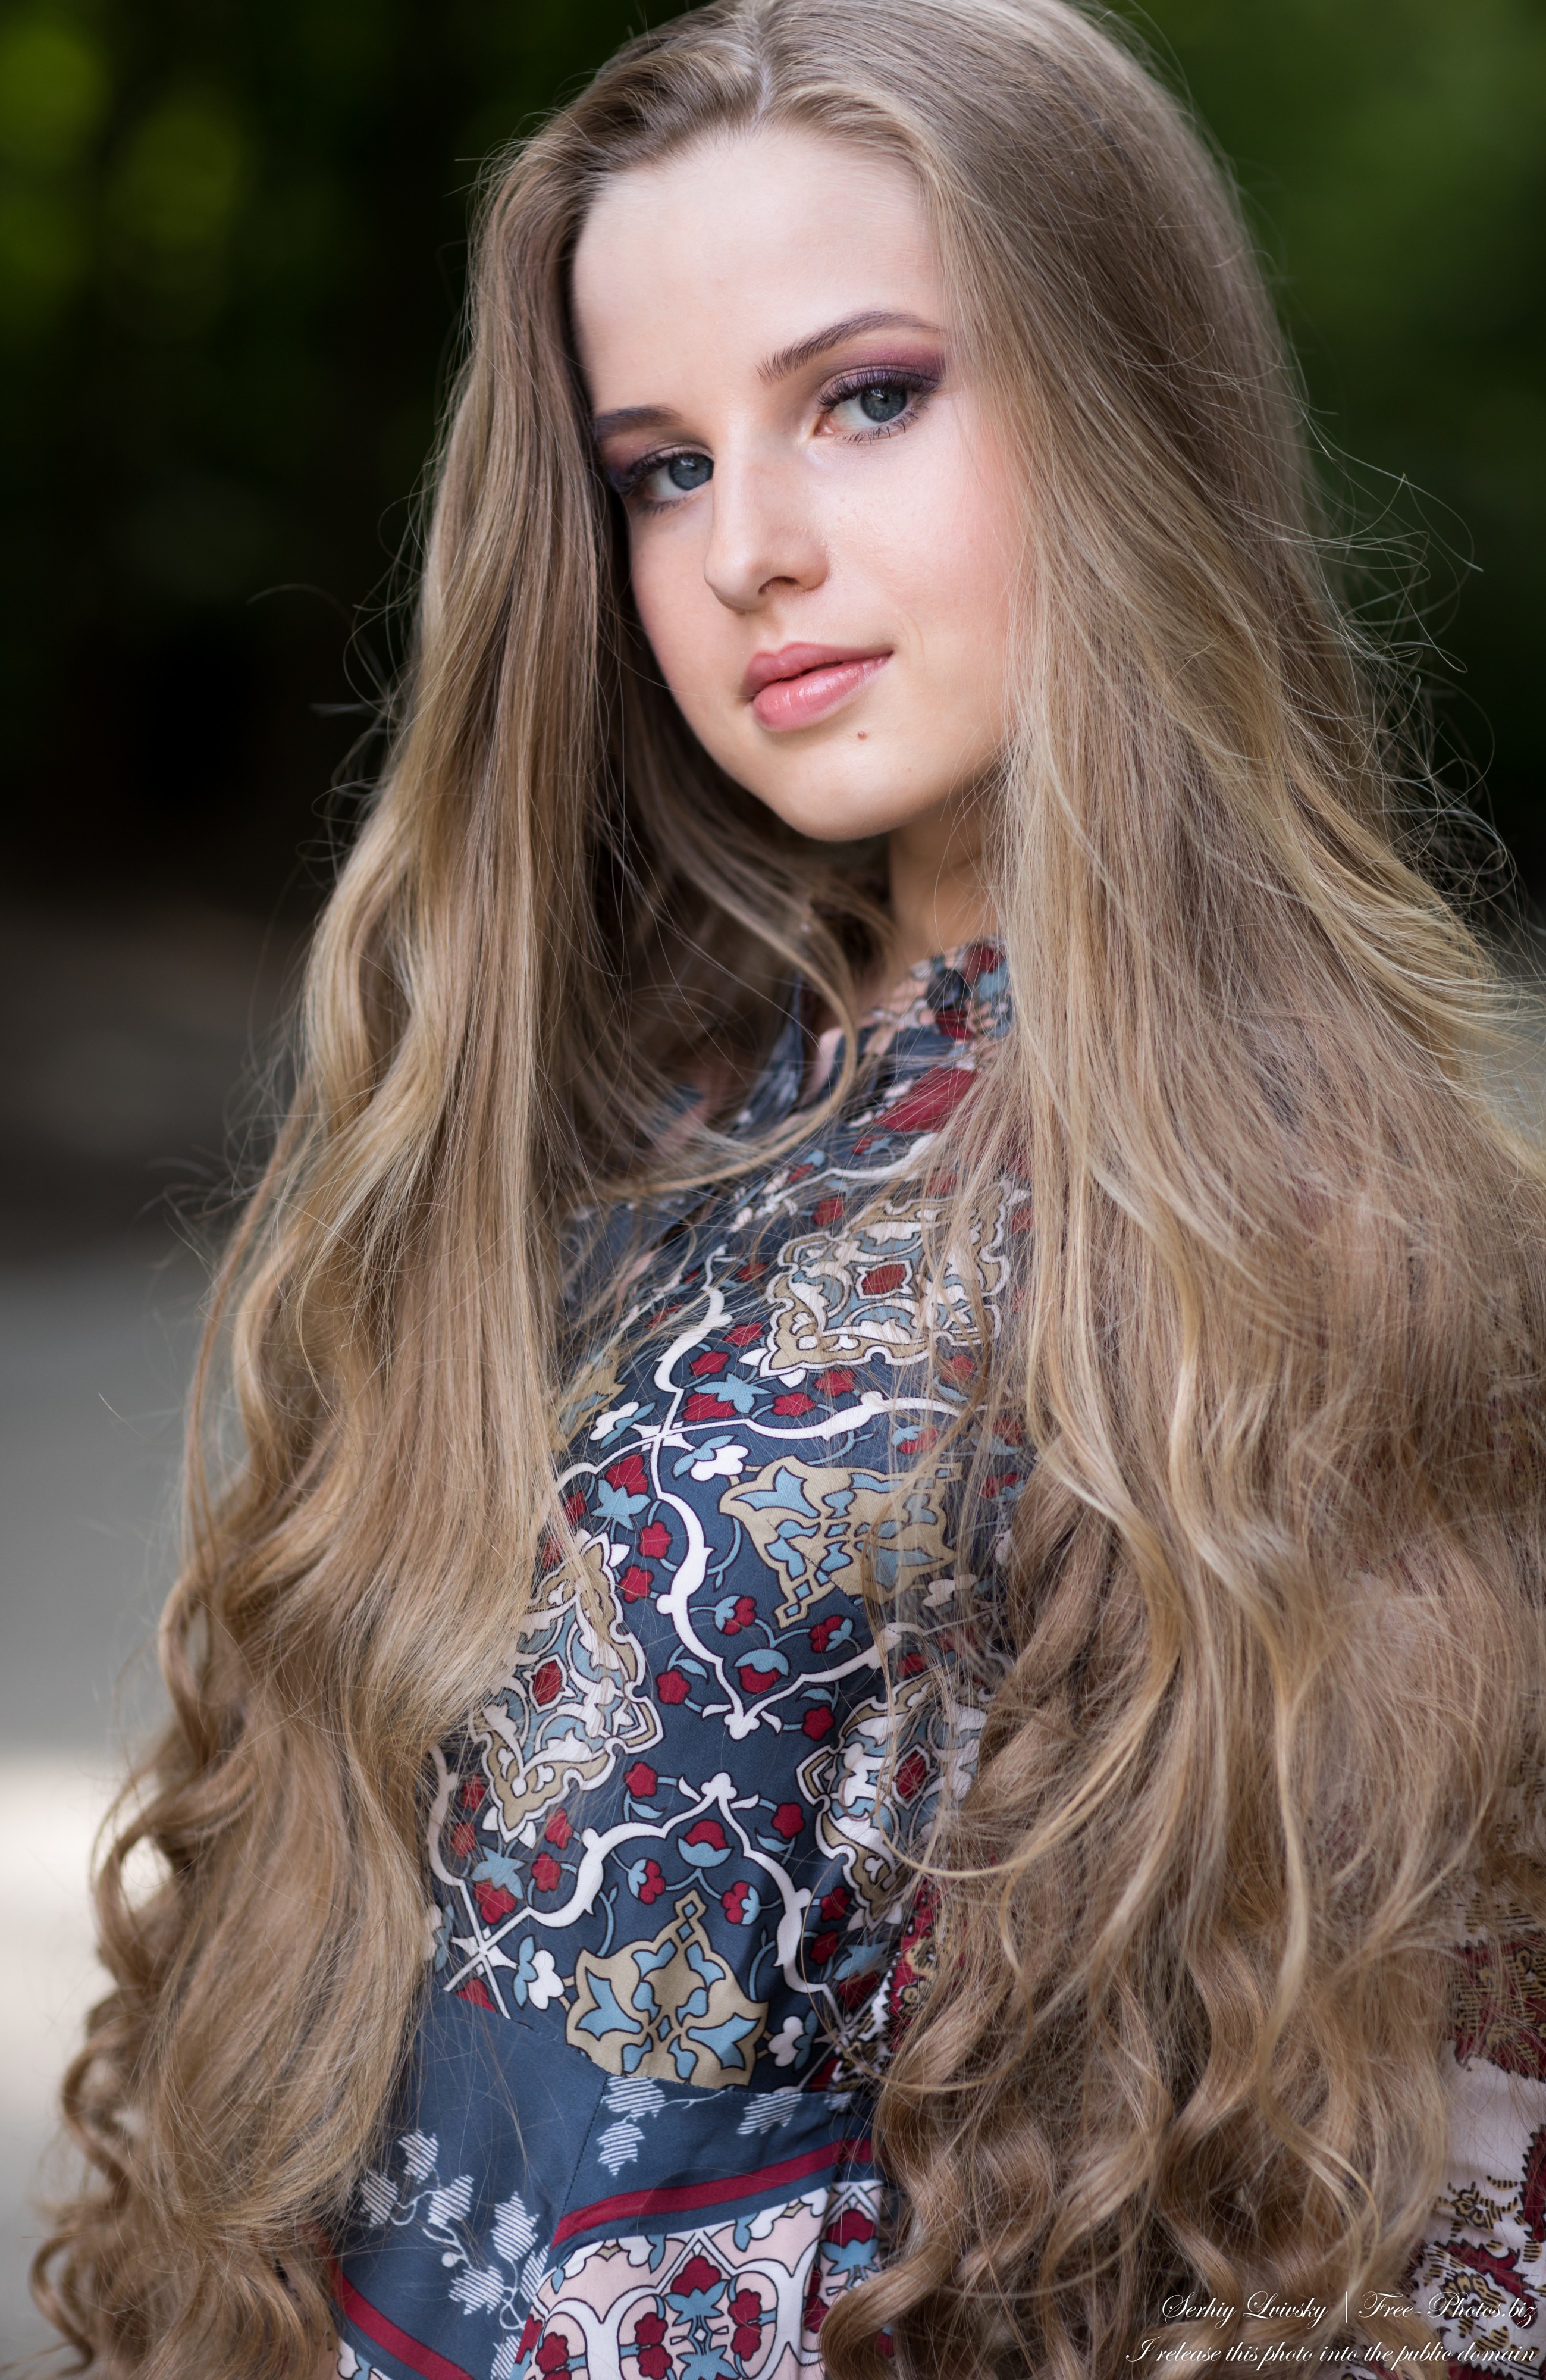 Diana - an 18-year-old natural blonde girl photographed by Serhiy Lvivsky in July 2020, picture 27